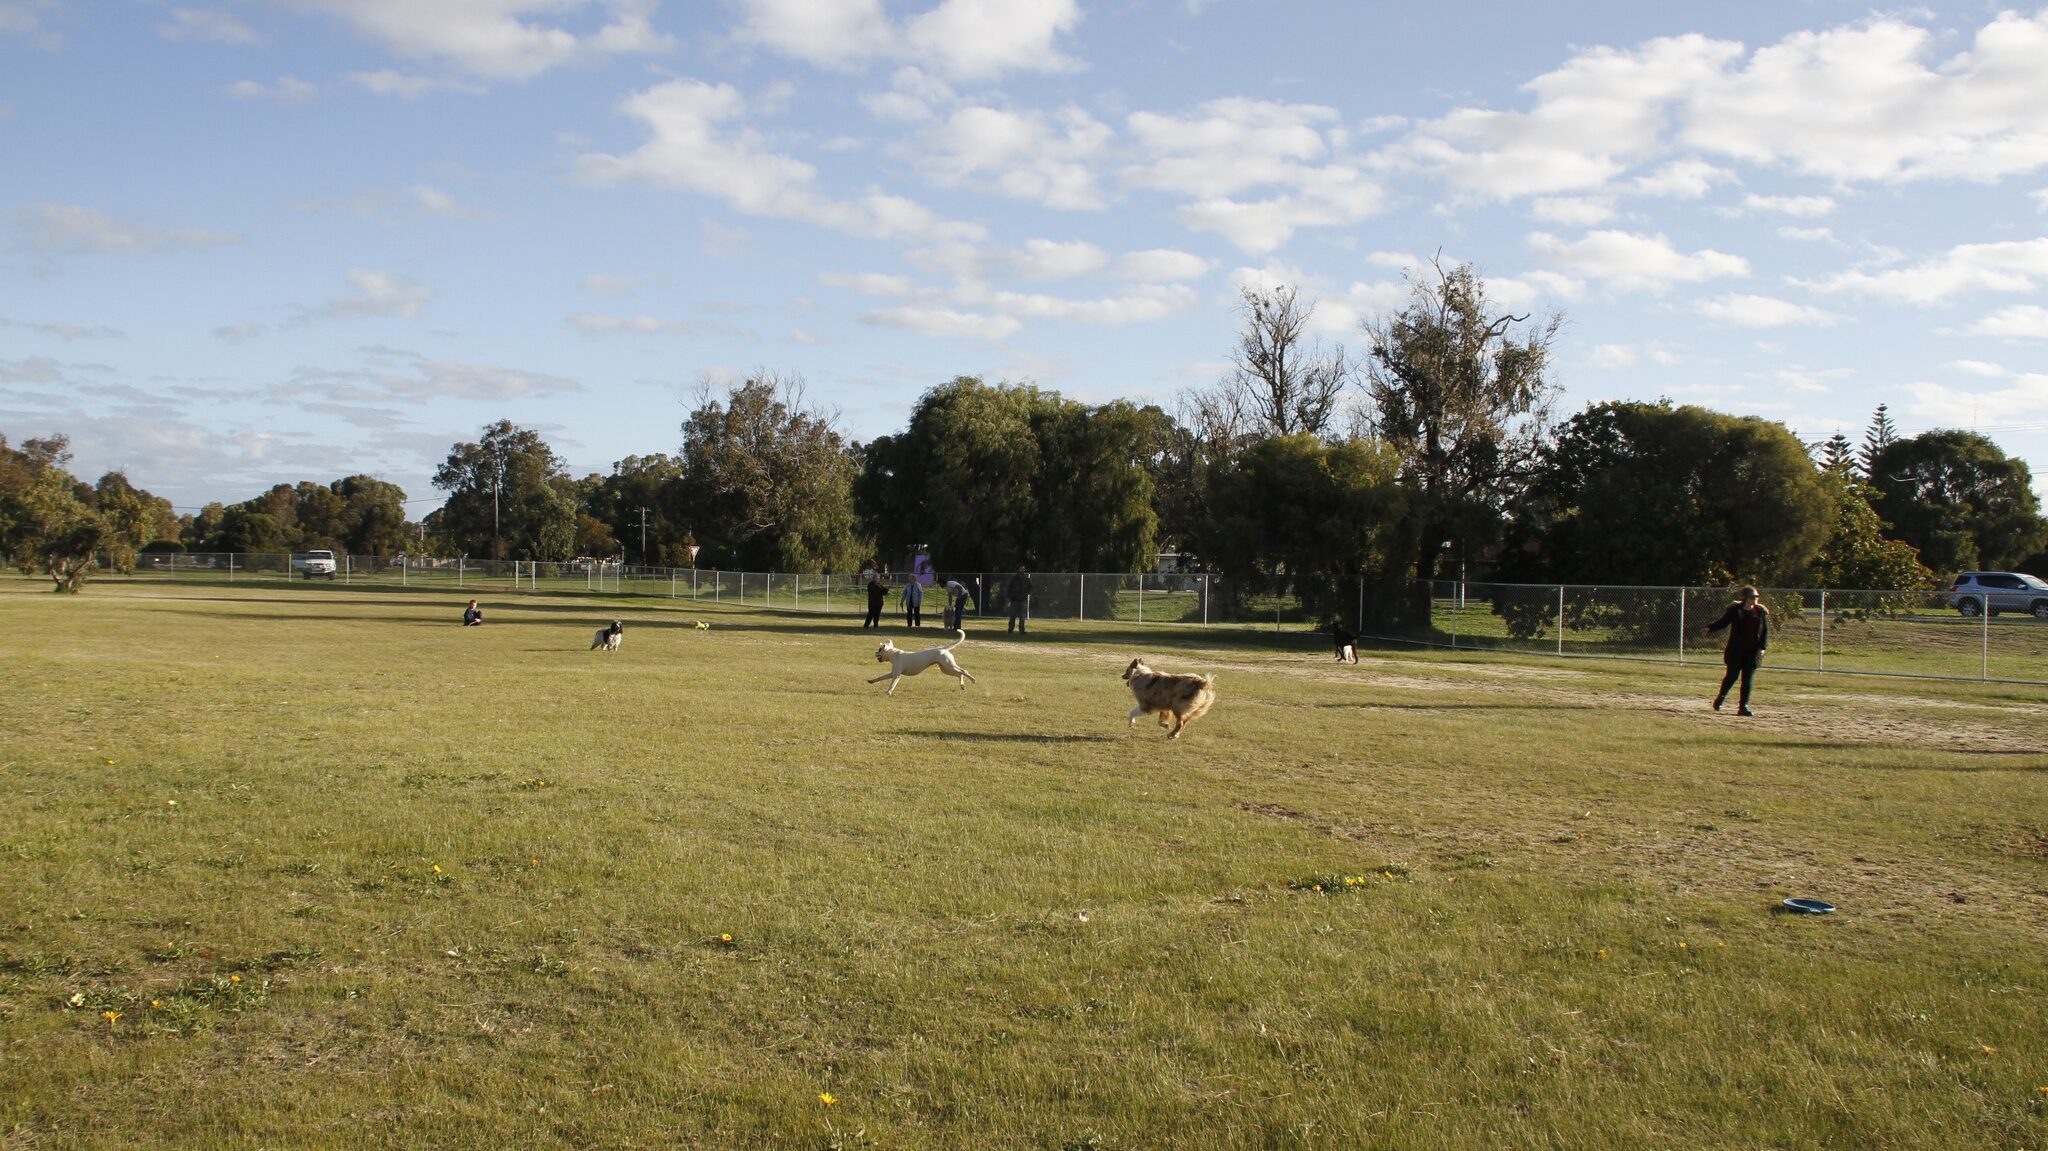 Dog park upgrades begin - dogs playing a fenced in park.